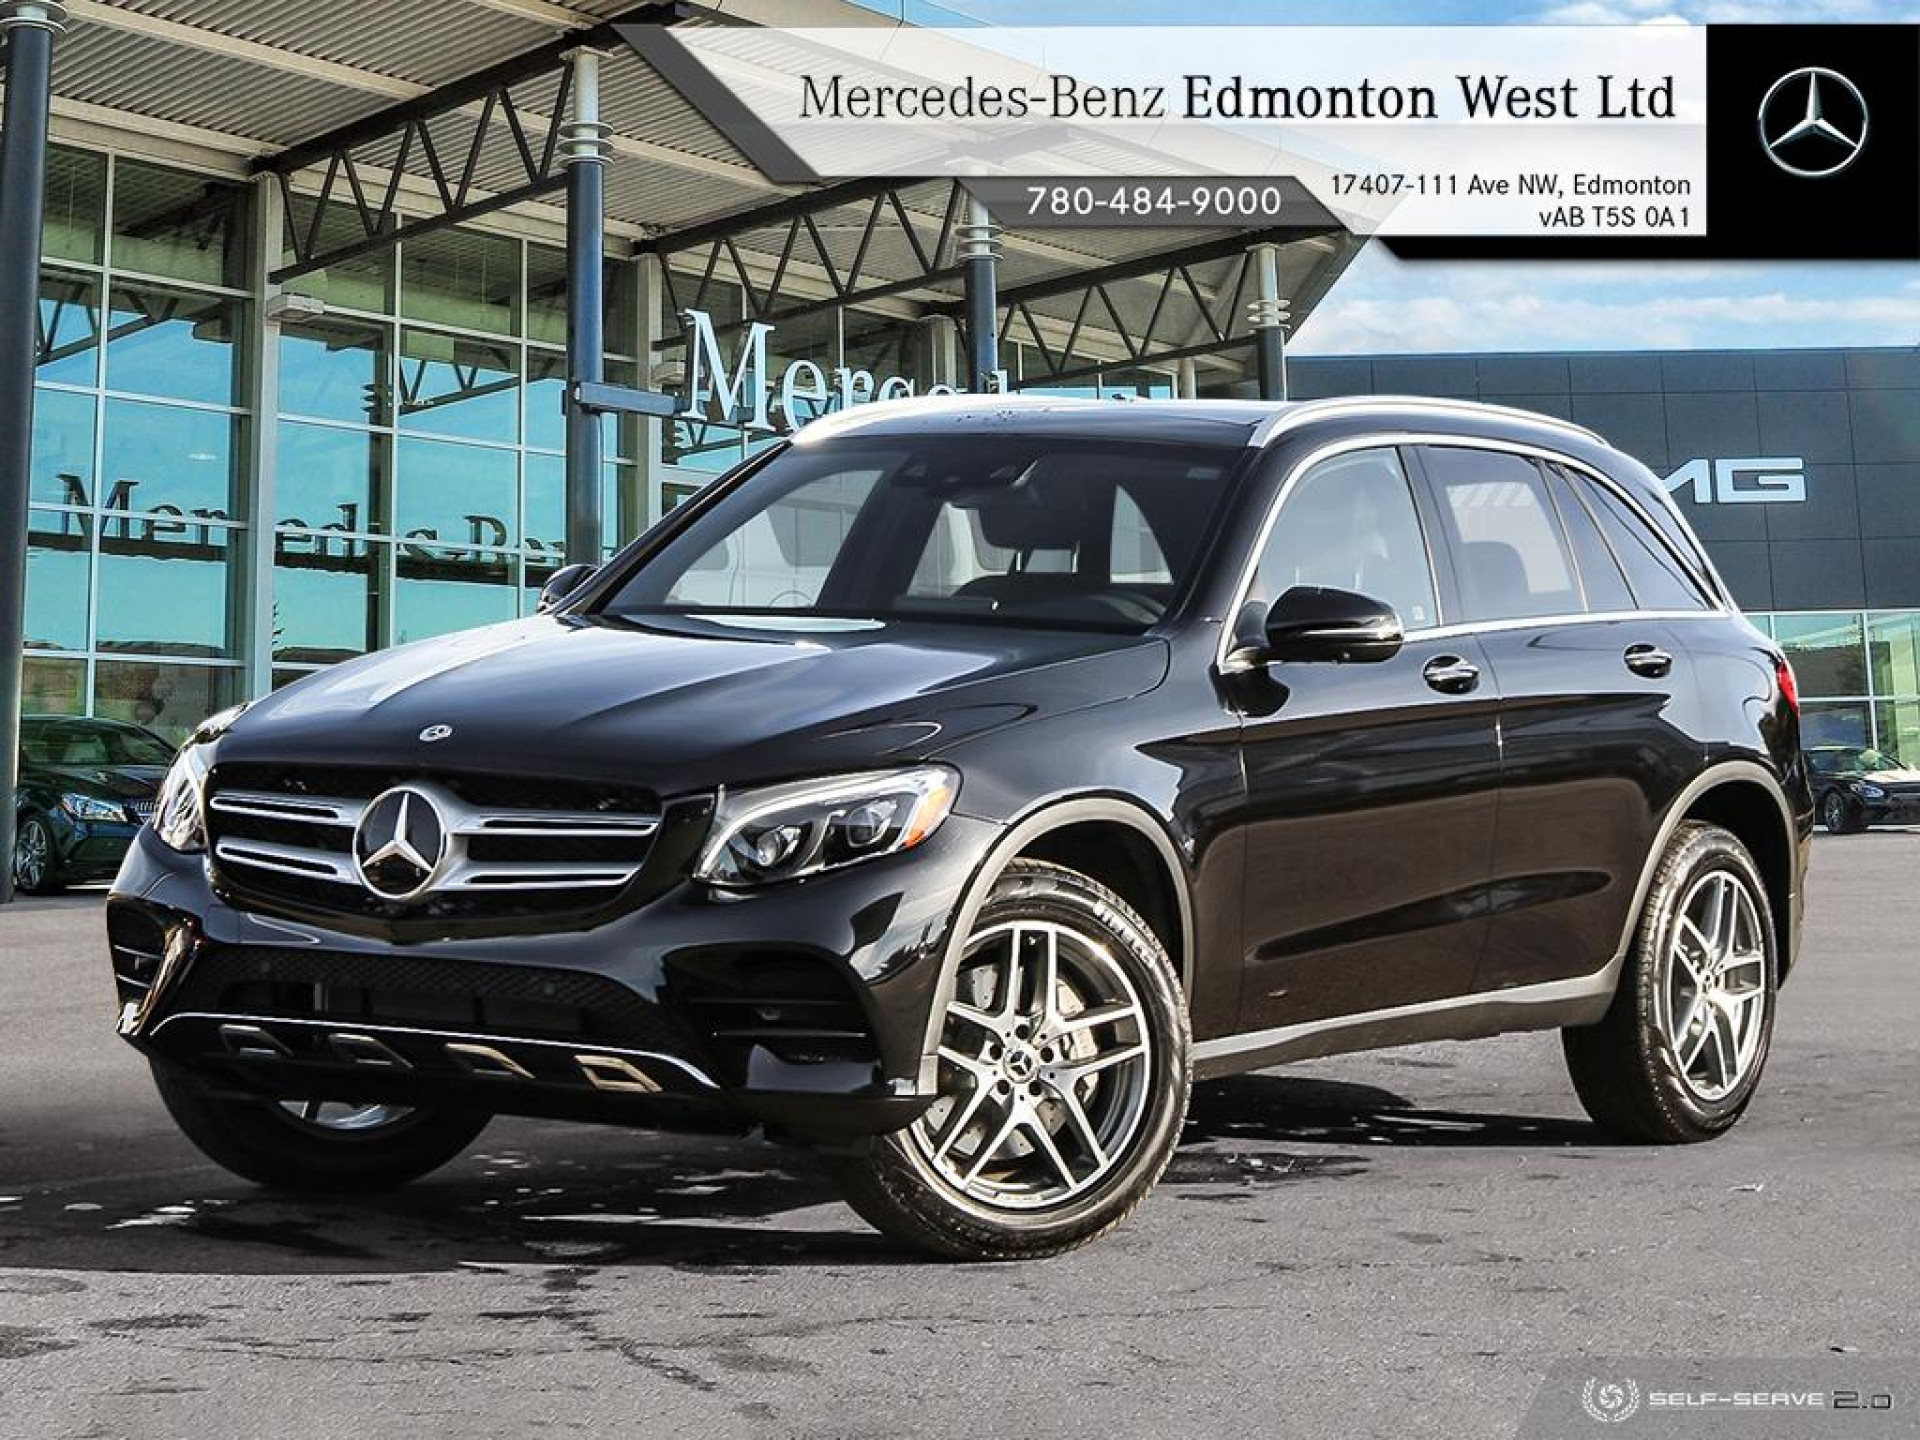 Pre-Owned 2019 Mercedes Benz GLC 300 4MATIC SUV Executive Demo, Low KM ...